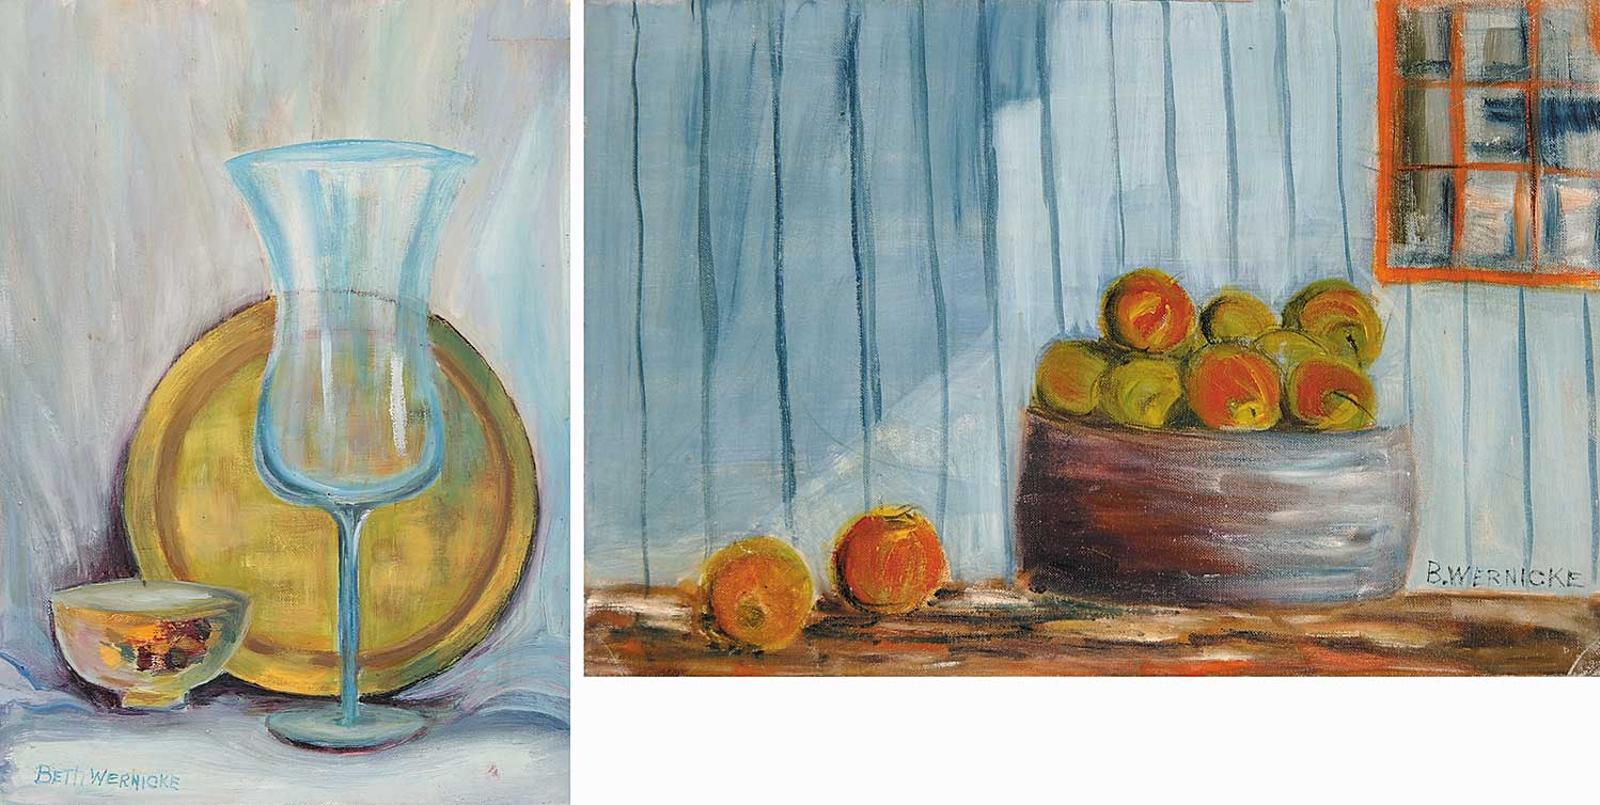 Beth Wernicke - Untitled - Still Life with Apples